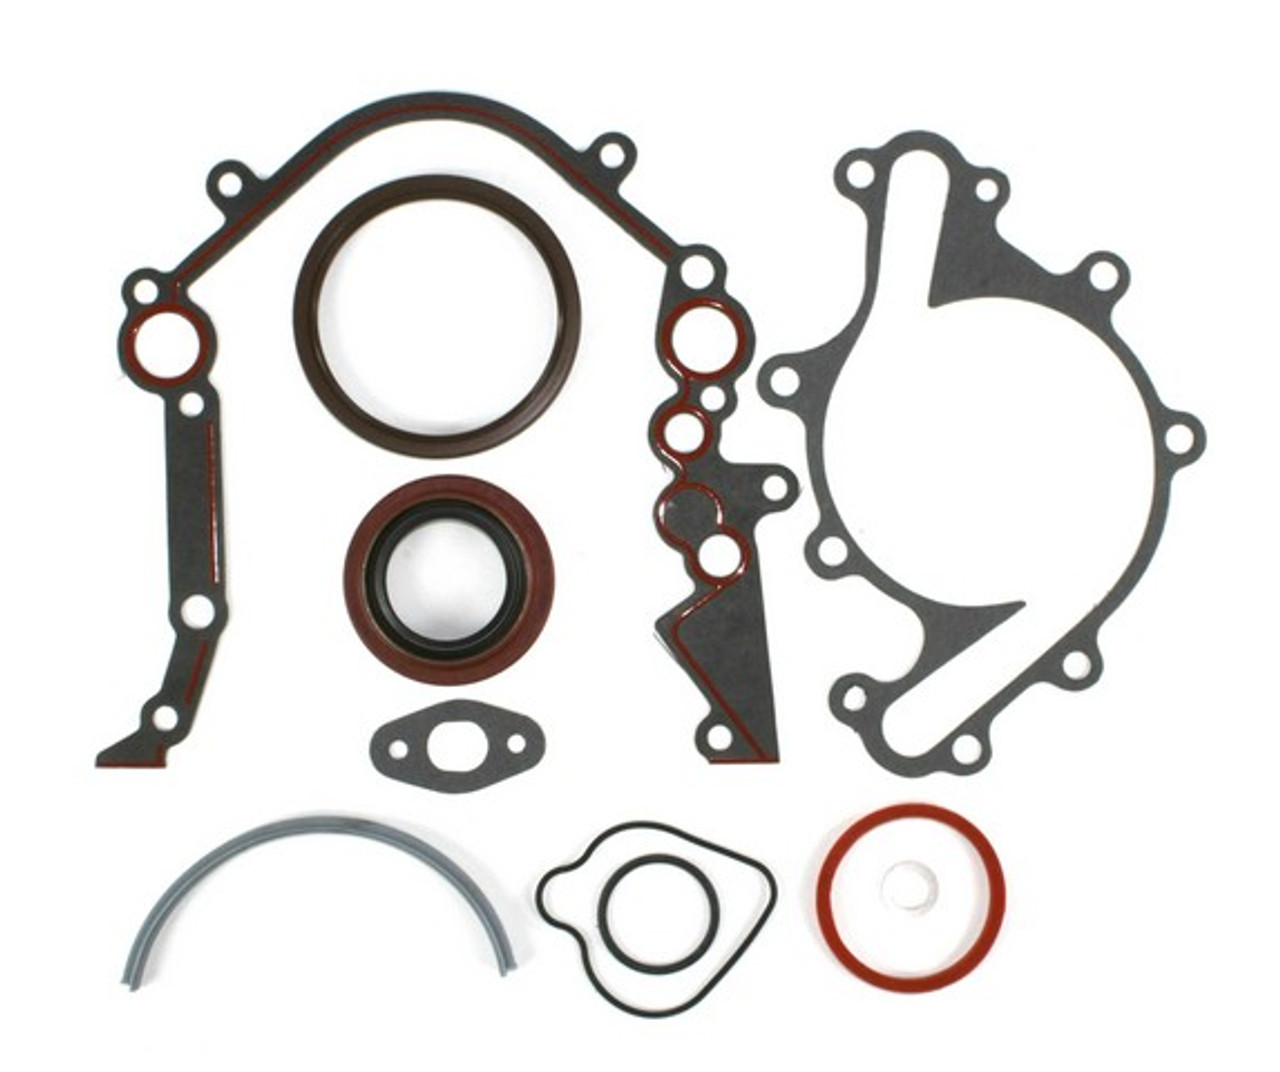 1989 Lincoln Continental 3.8L Lower Gasket Set LGS4116.E11